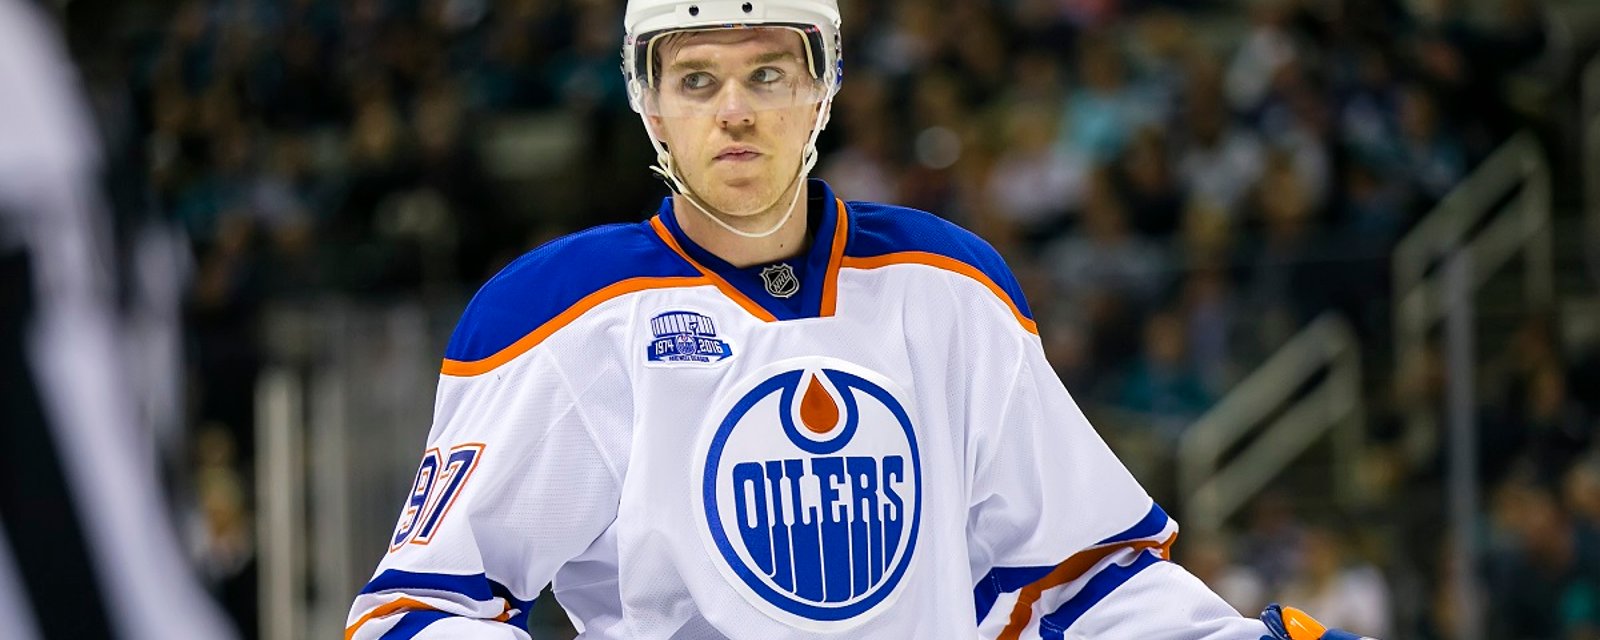 McDavid ,Crosby and Kessel all score beauties in the shoot out.